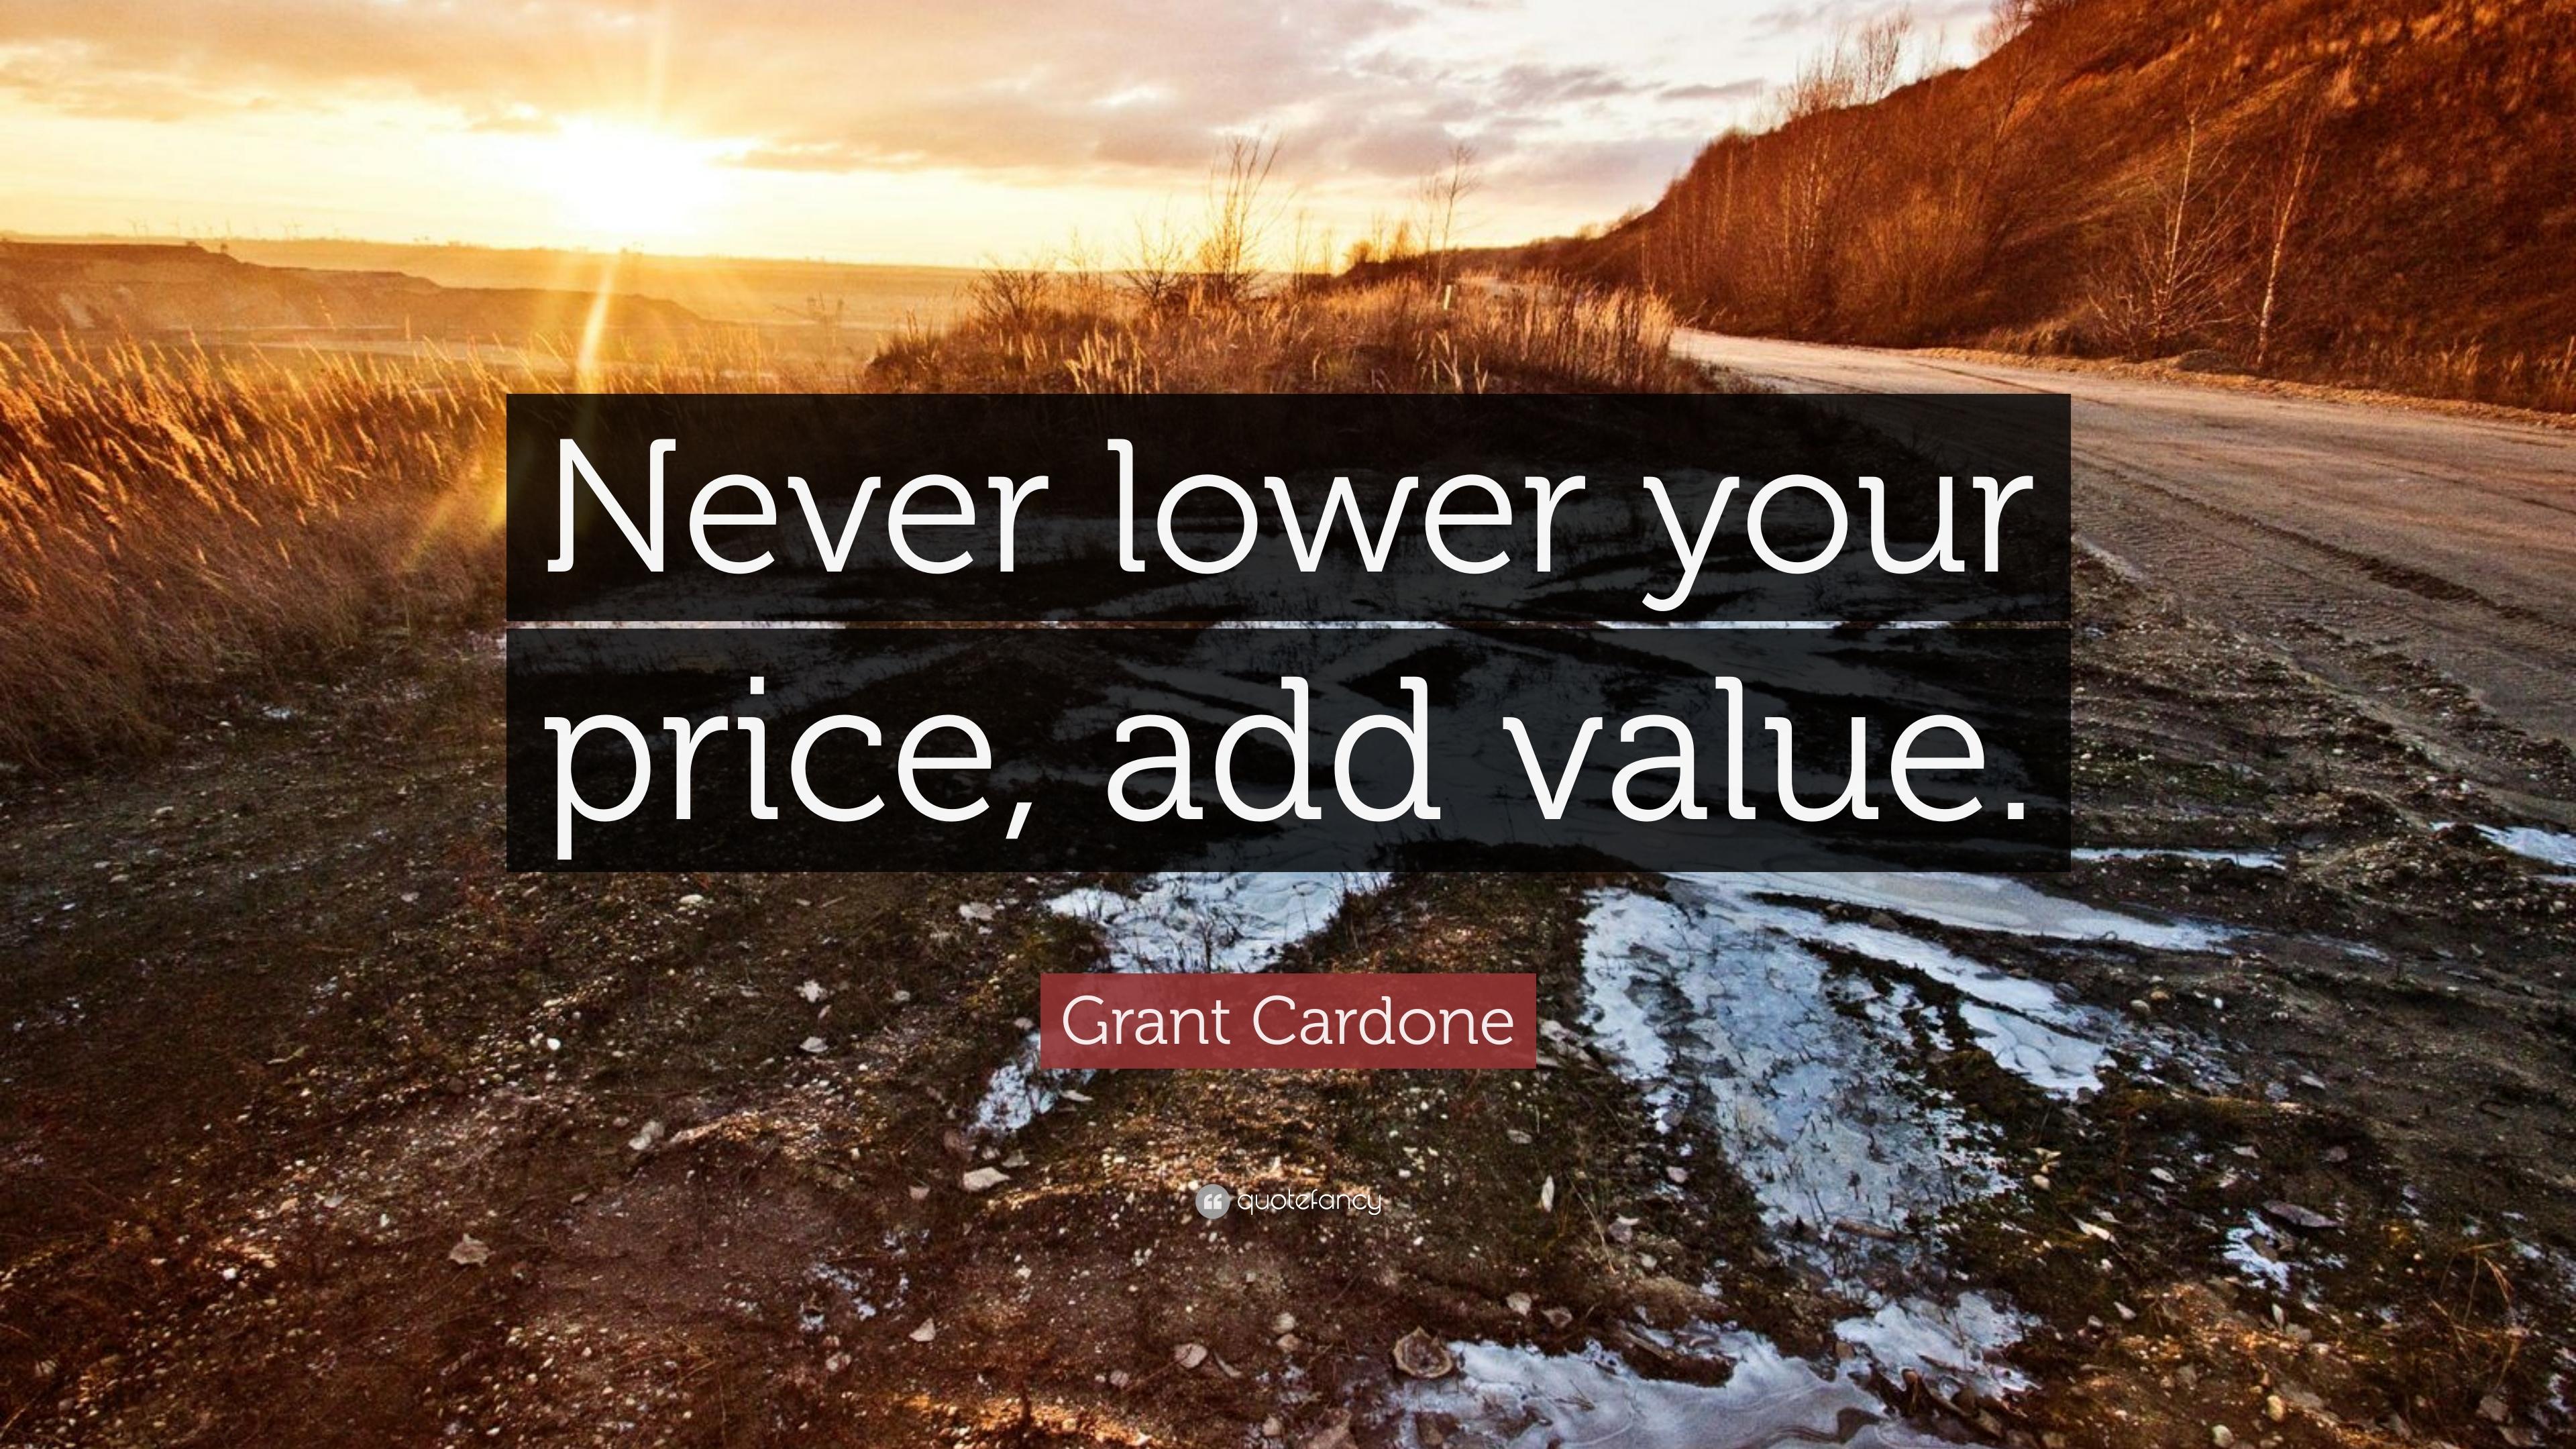 Grant Cardone Quote: “Never lower your price, add value